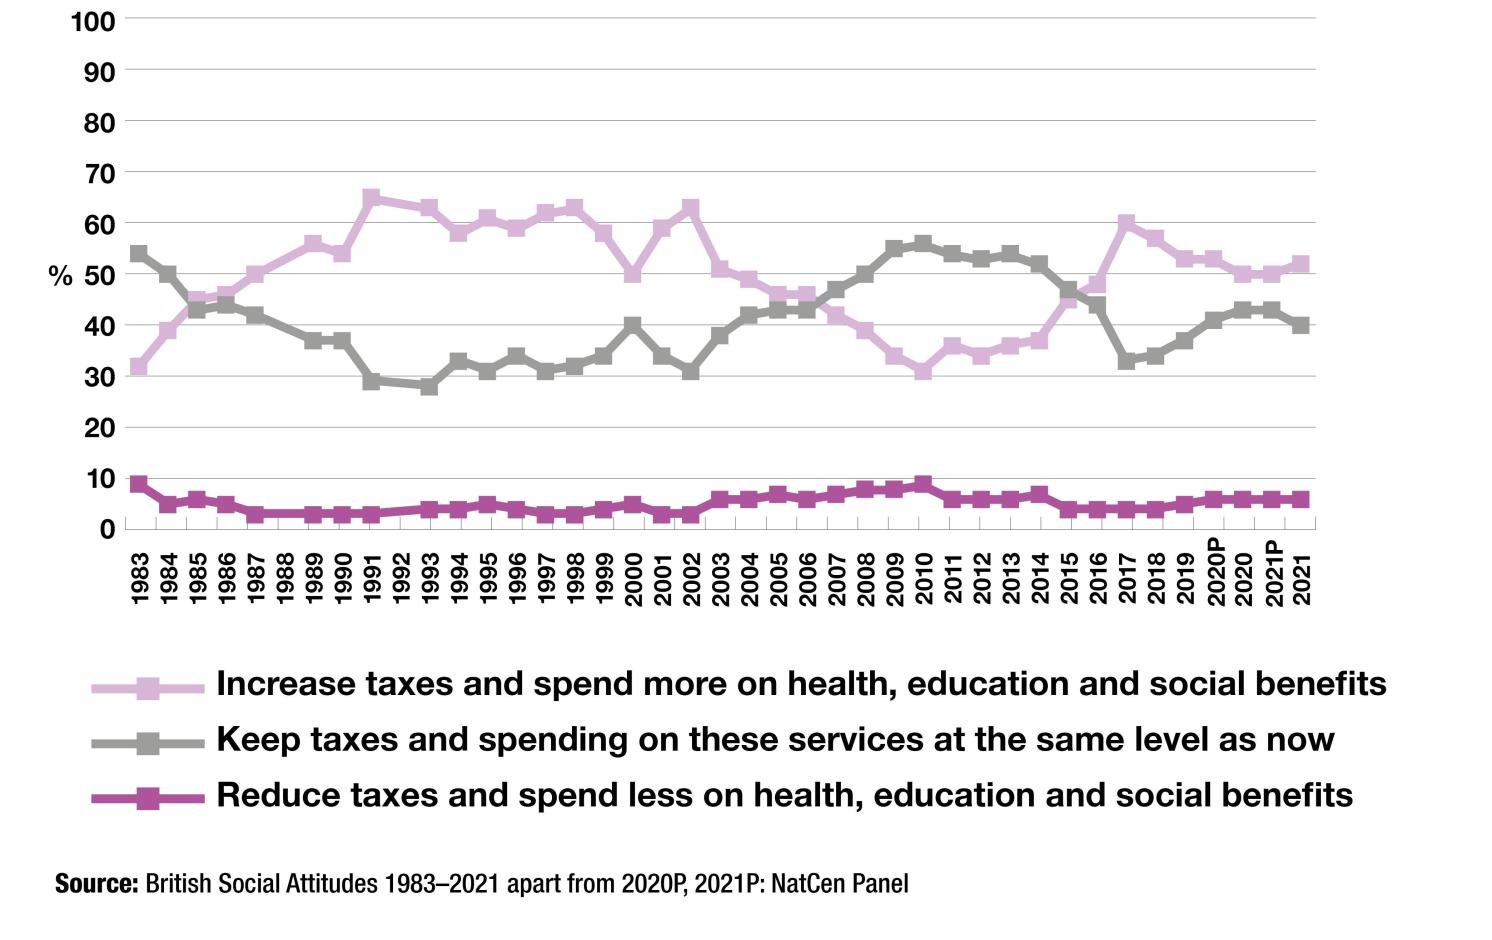 Graph displaying attitudes in Britain towards taxation and public spending, 1983-2021